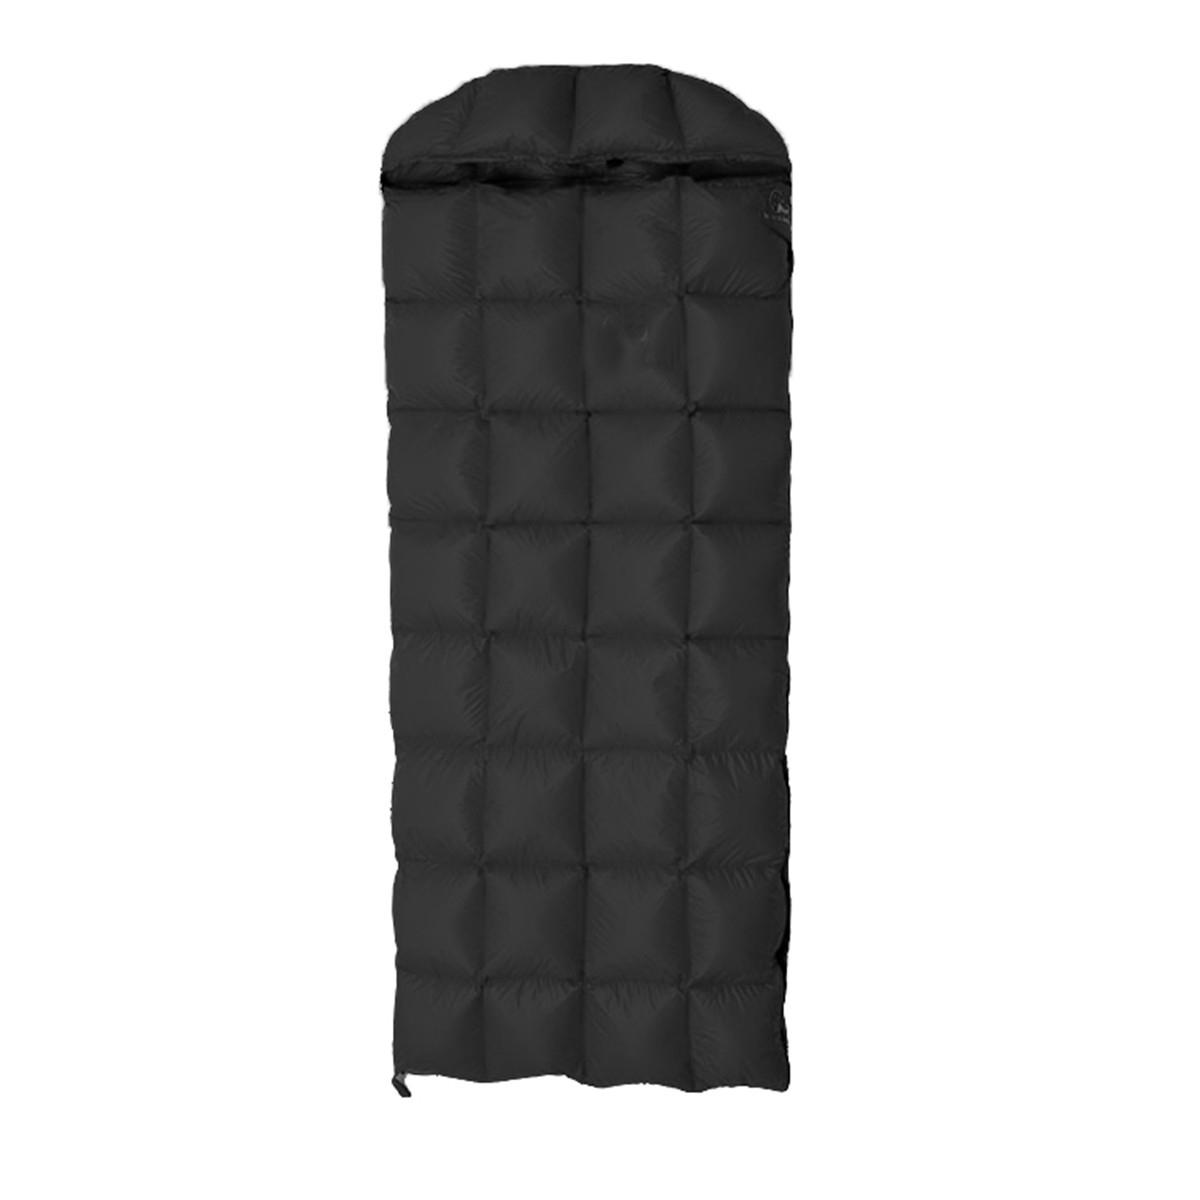 Outdoor Camping Traveling Goose Down Sleeping Bag Lightweight Adult Backpacking Compression Sleeping Bag